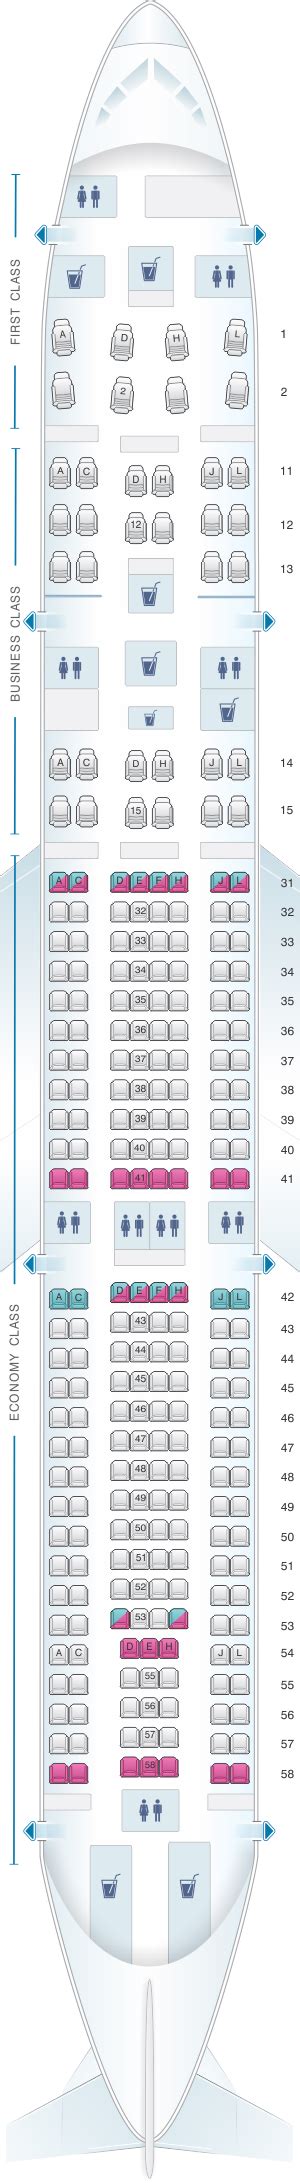 Seat Map Air China Airbus A340 300 Seatmaestro